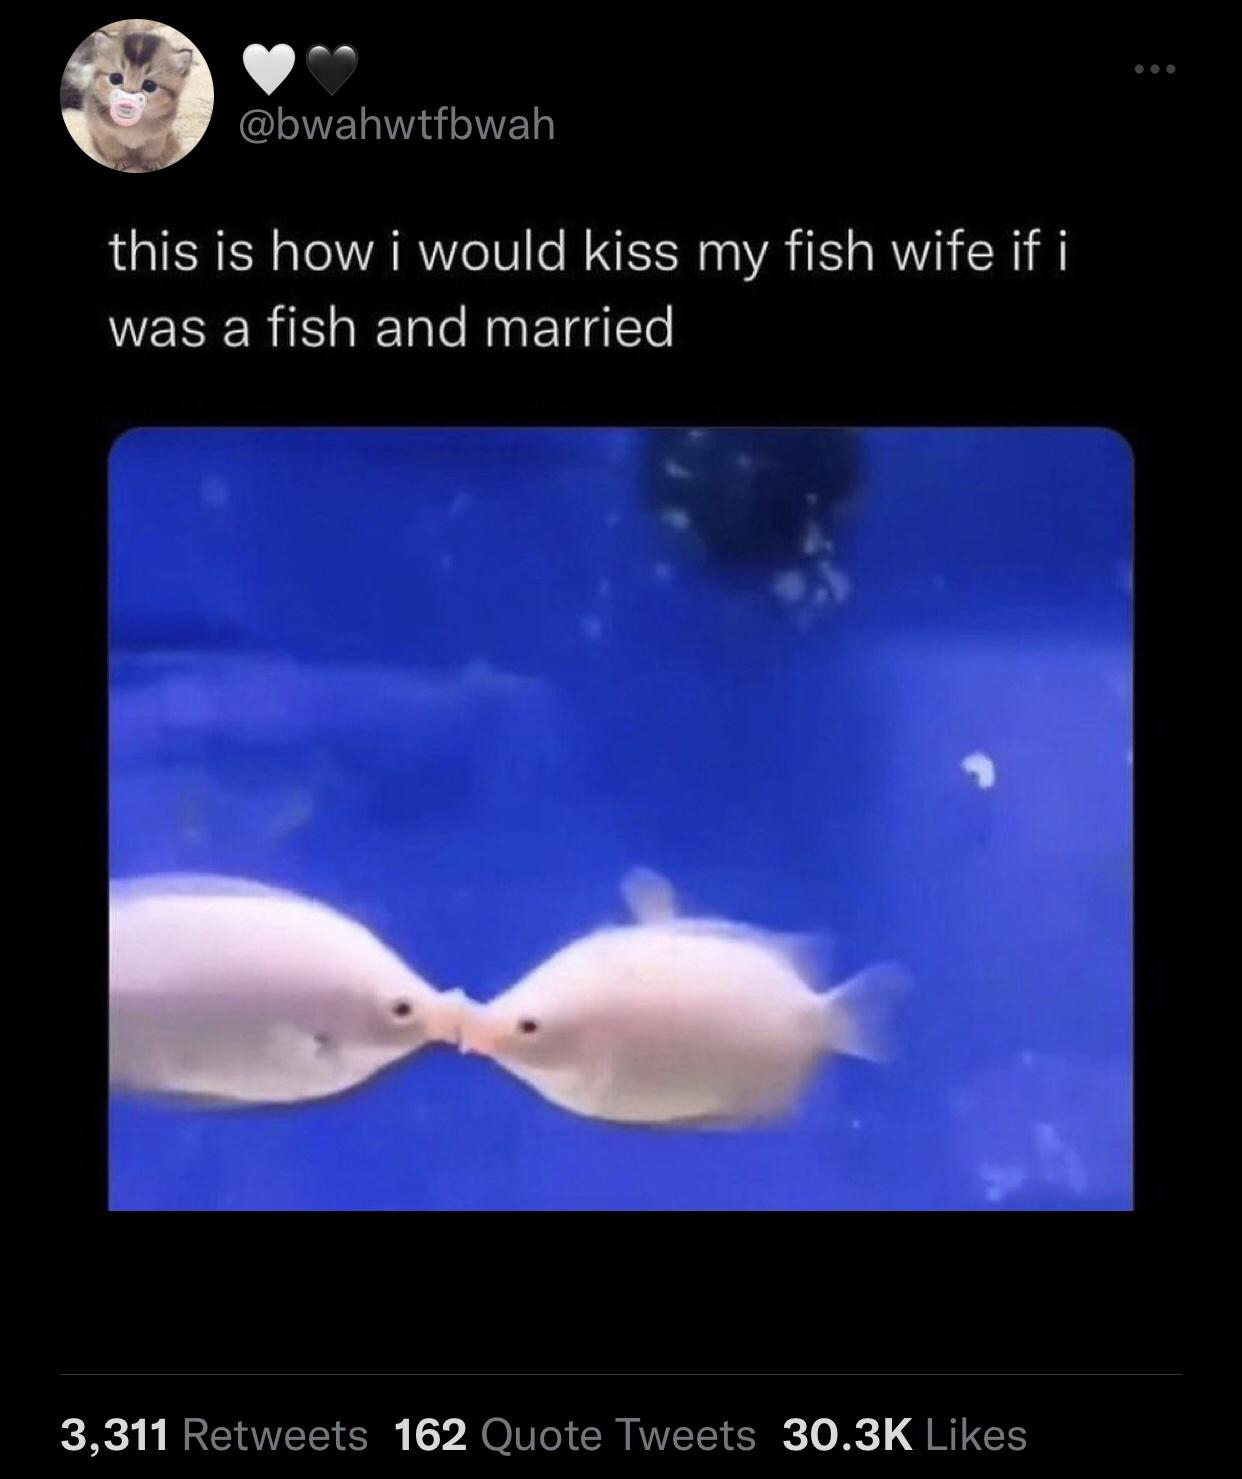 funny and savage tweets - would kiss my fish wife - this is how i would kiss my fish wife if i was a fish and married 3,311 162 Quote Tweets